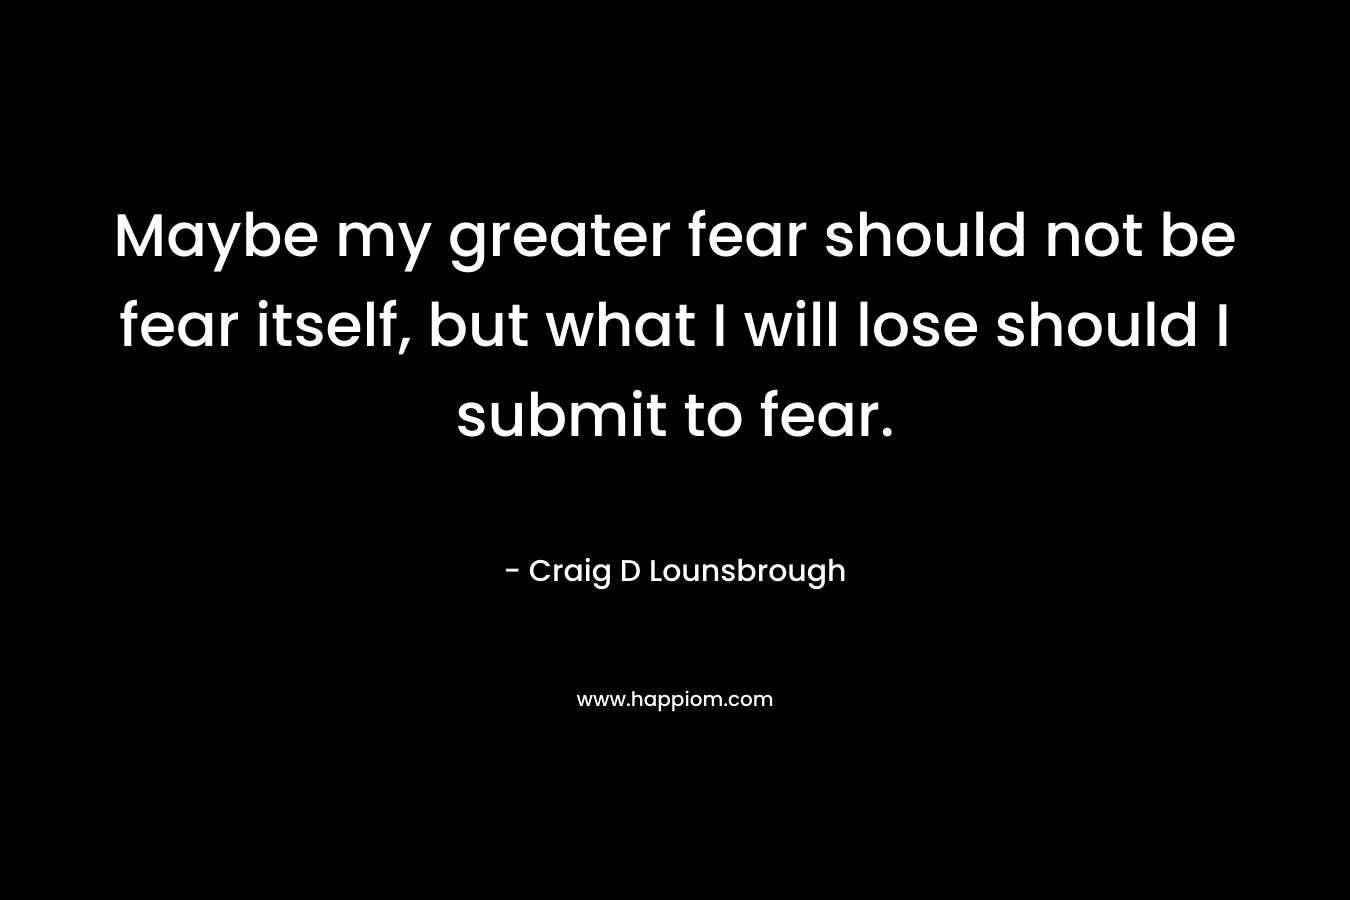 Maybe my greater fear should not be fear itself, but what I will lose should I submit to fear.